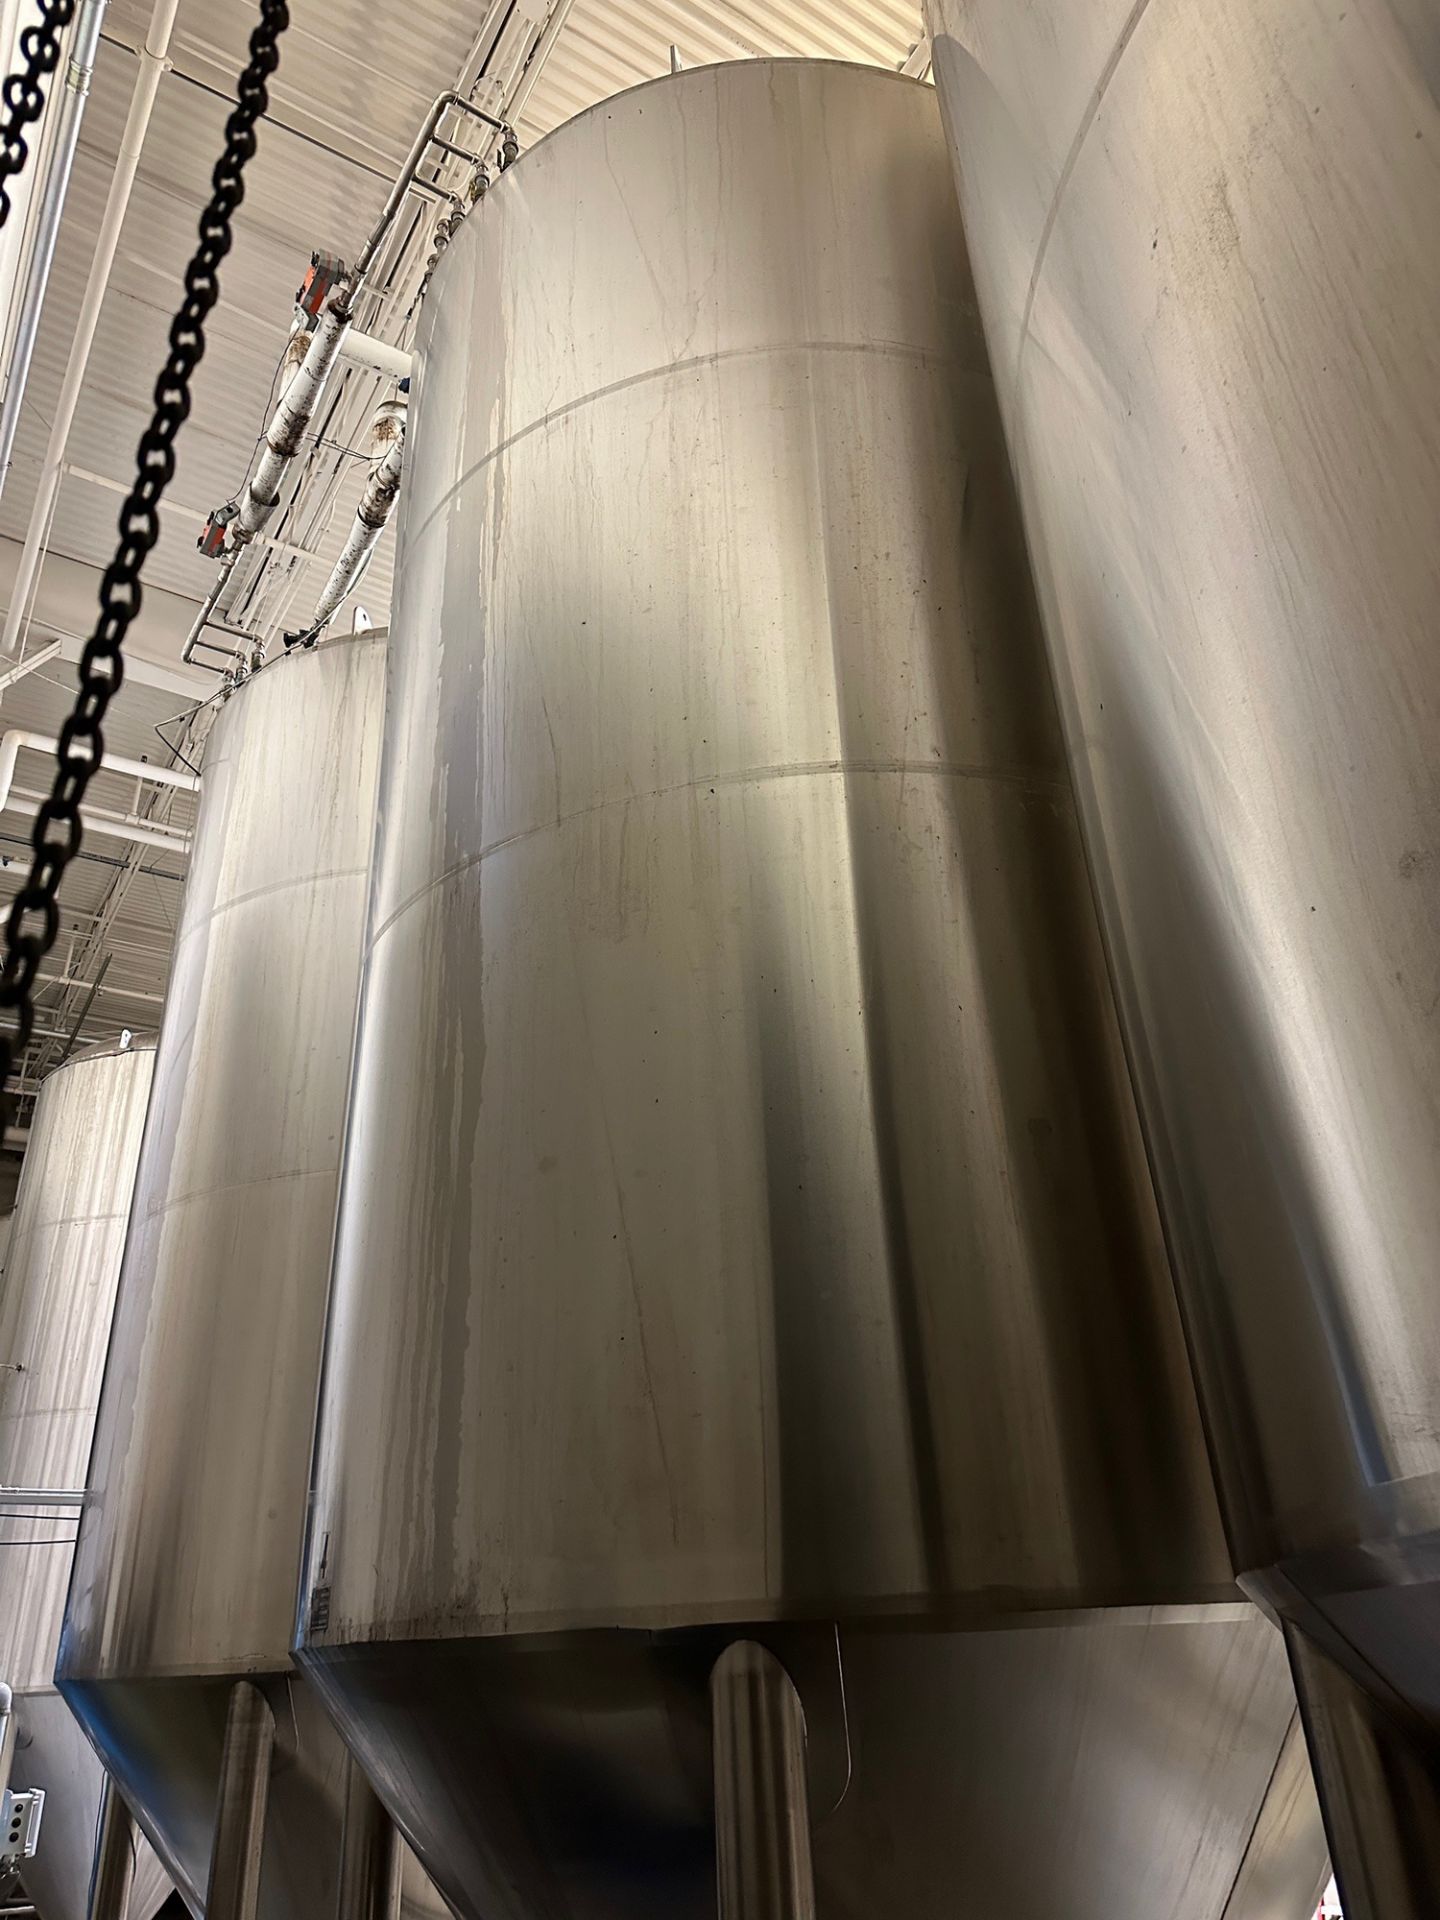 (1 of 6) 2016 NSI 132 BBL FV / 175 BBL or 5,400 Gal Max Capacity Stainless Steel Uni-Tank (4), Cone - Image 3 of 4